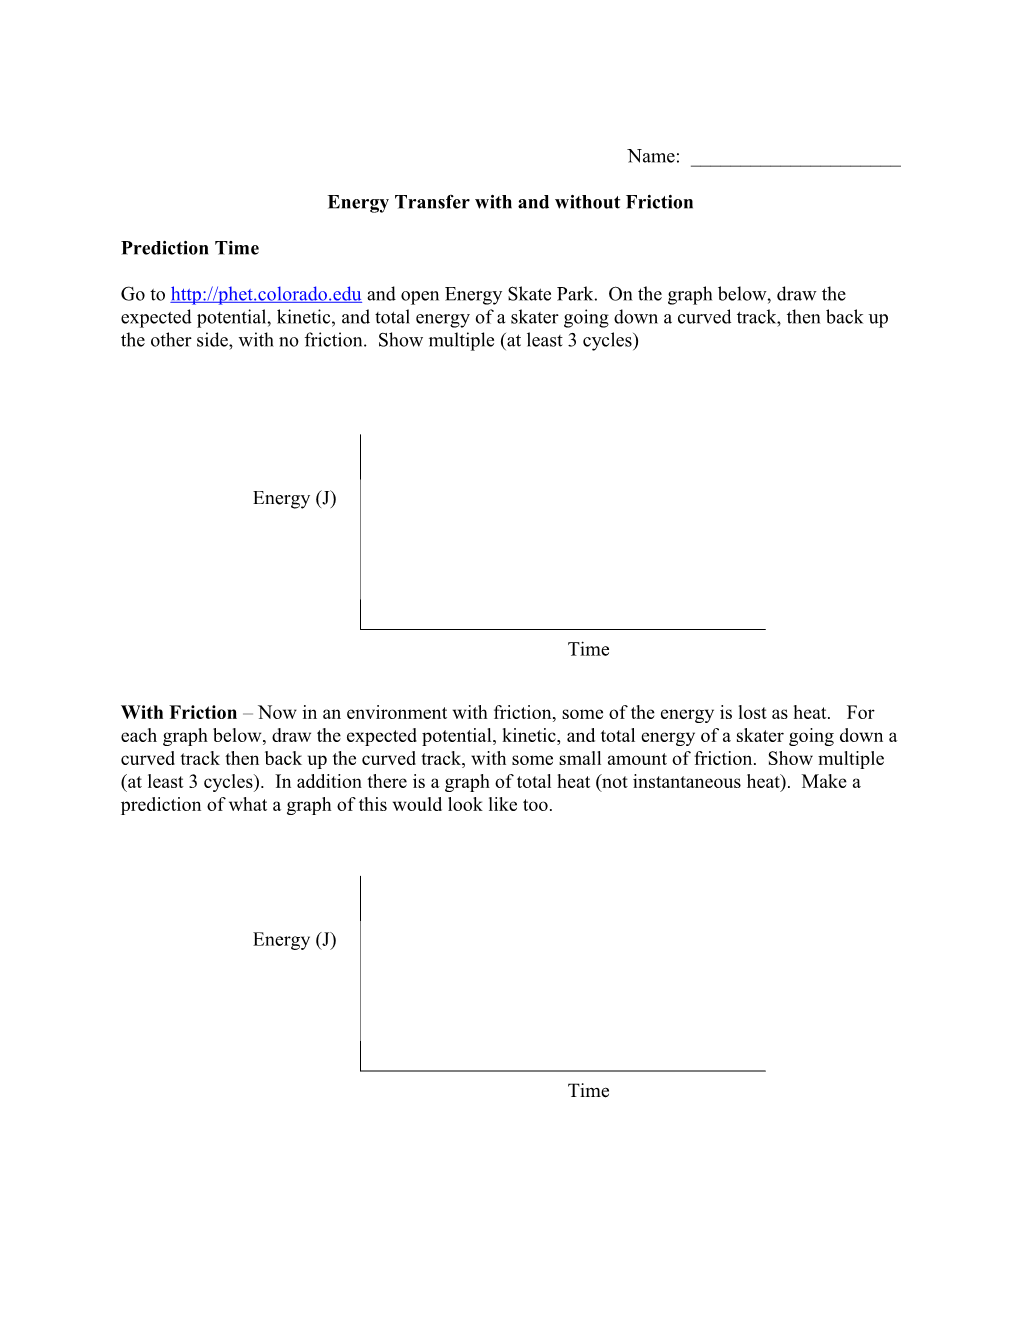 Energy Transfer with and Without Friction